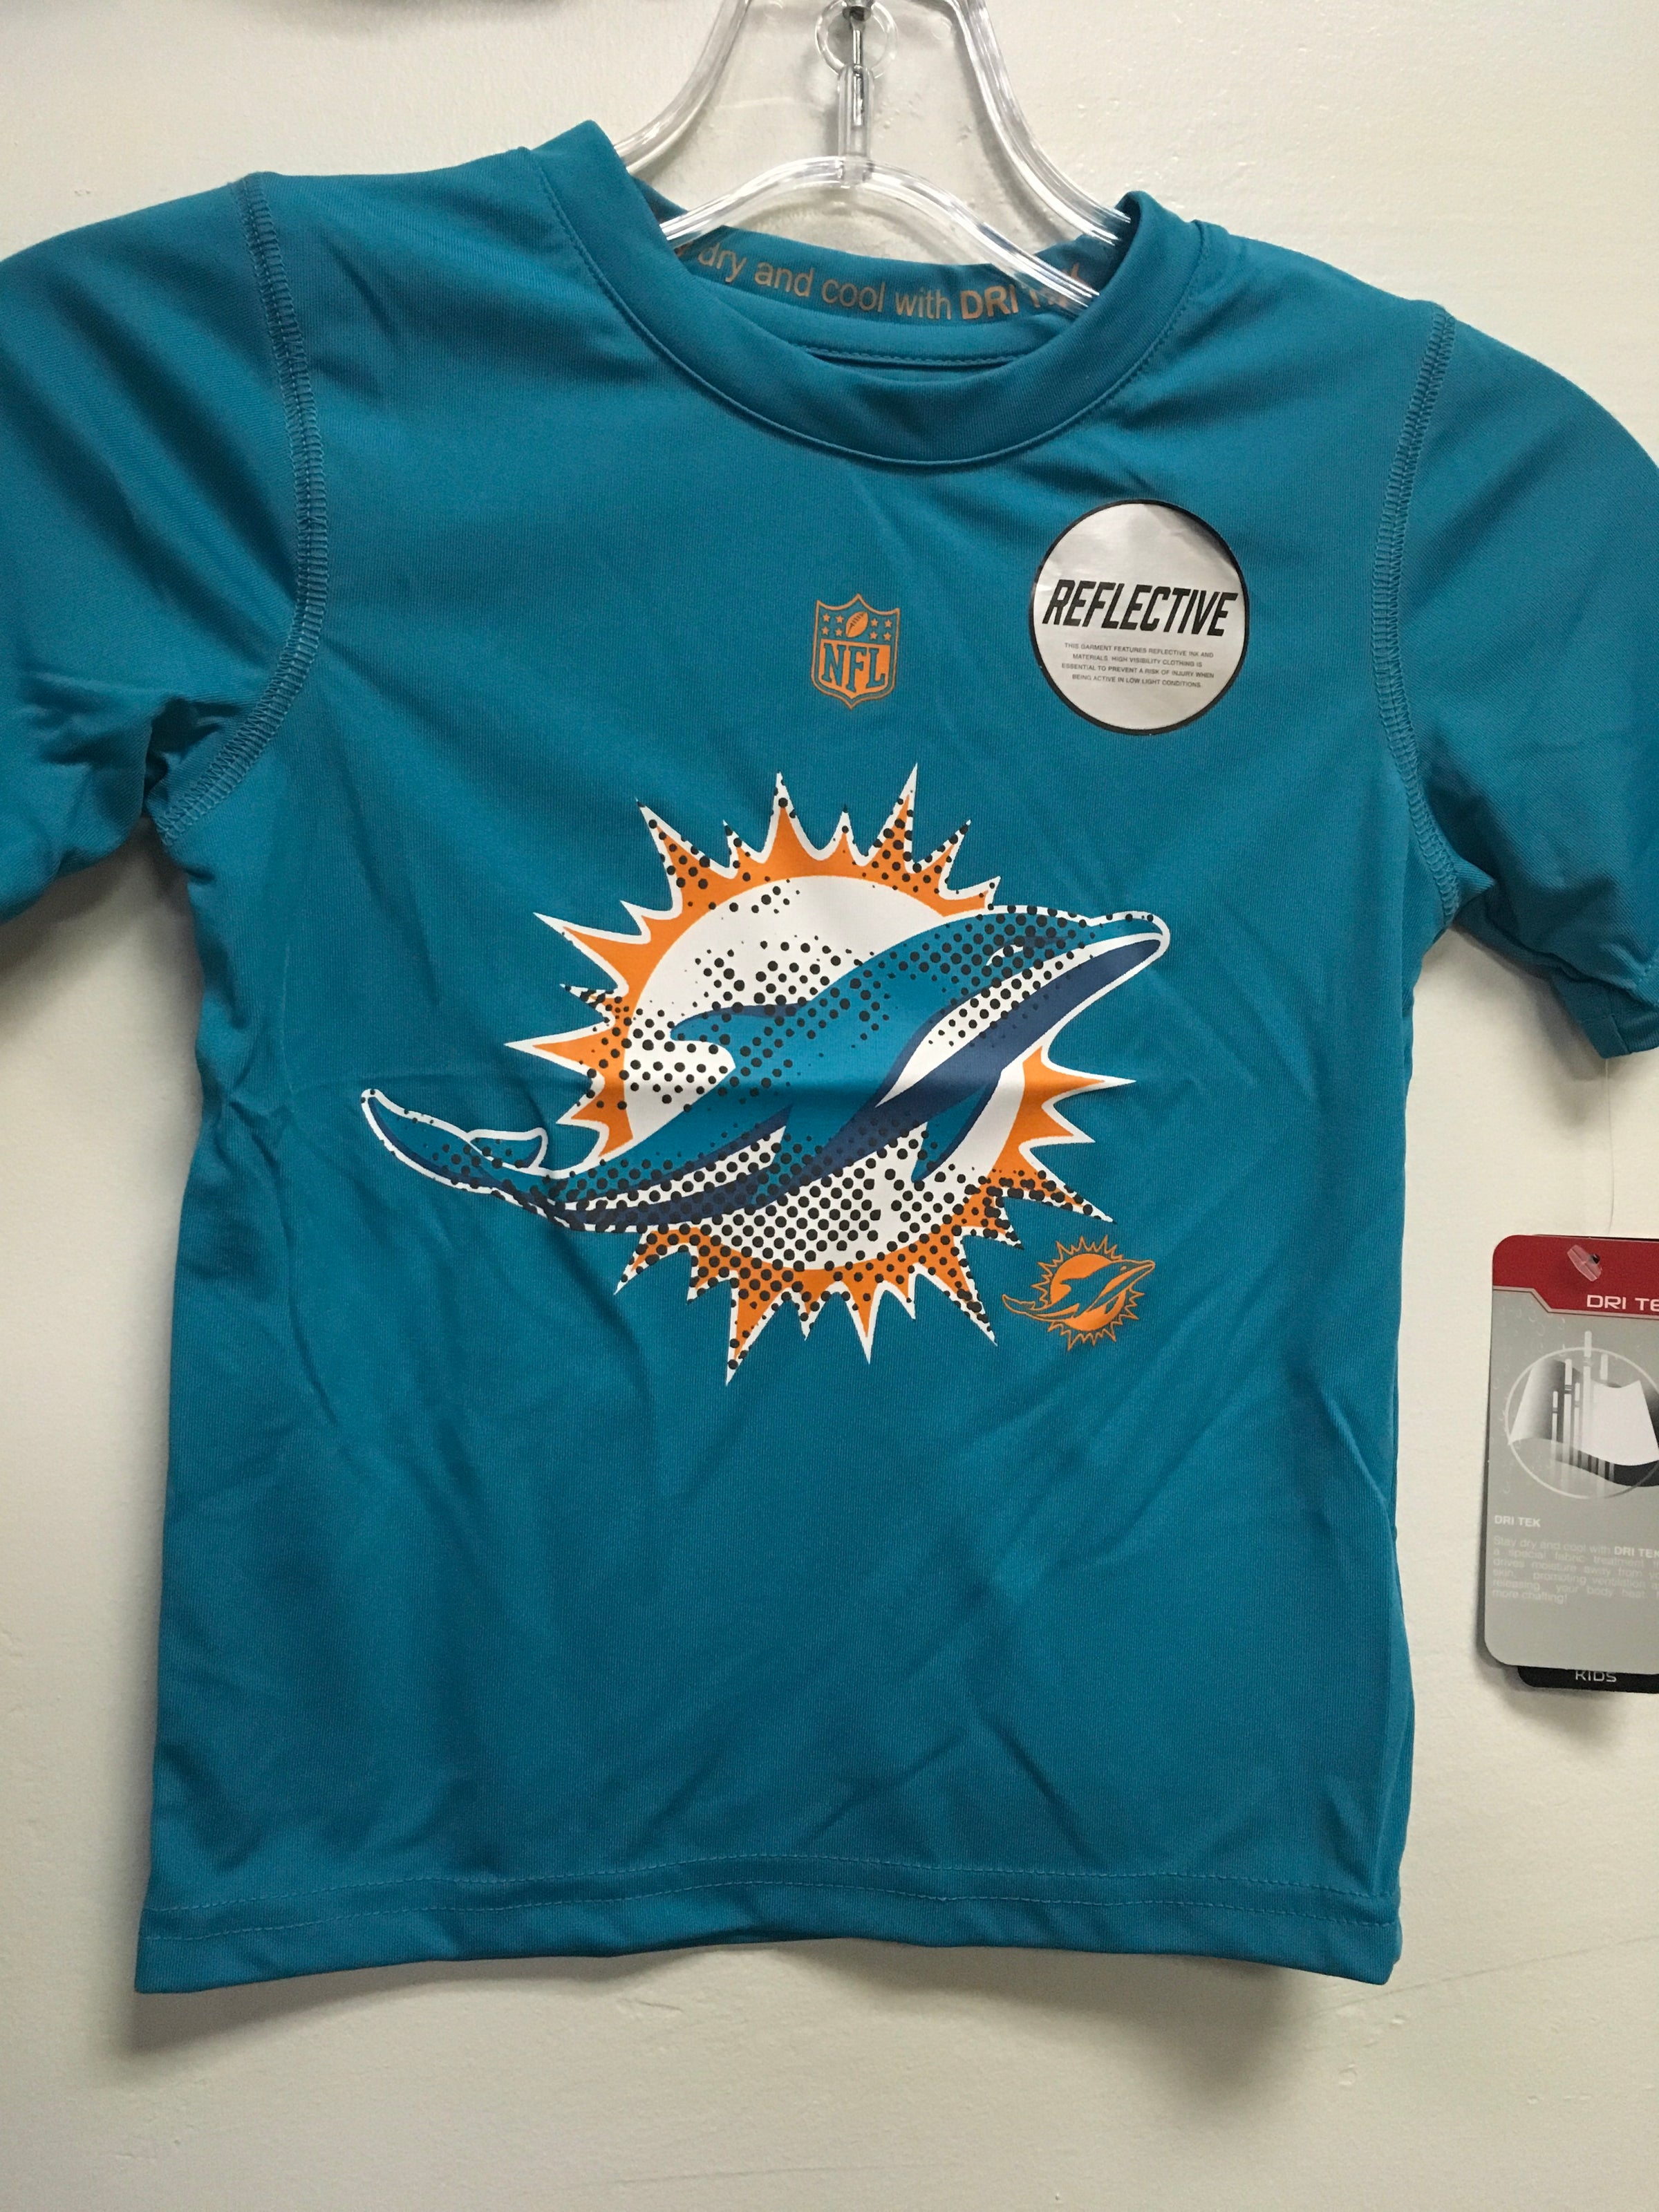 cool miami dolphins shirts